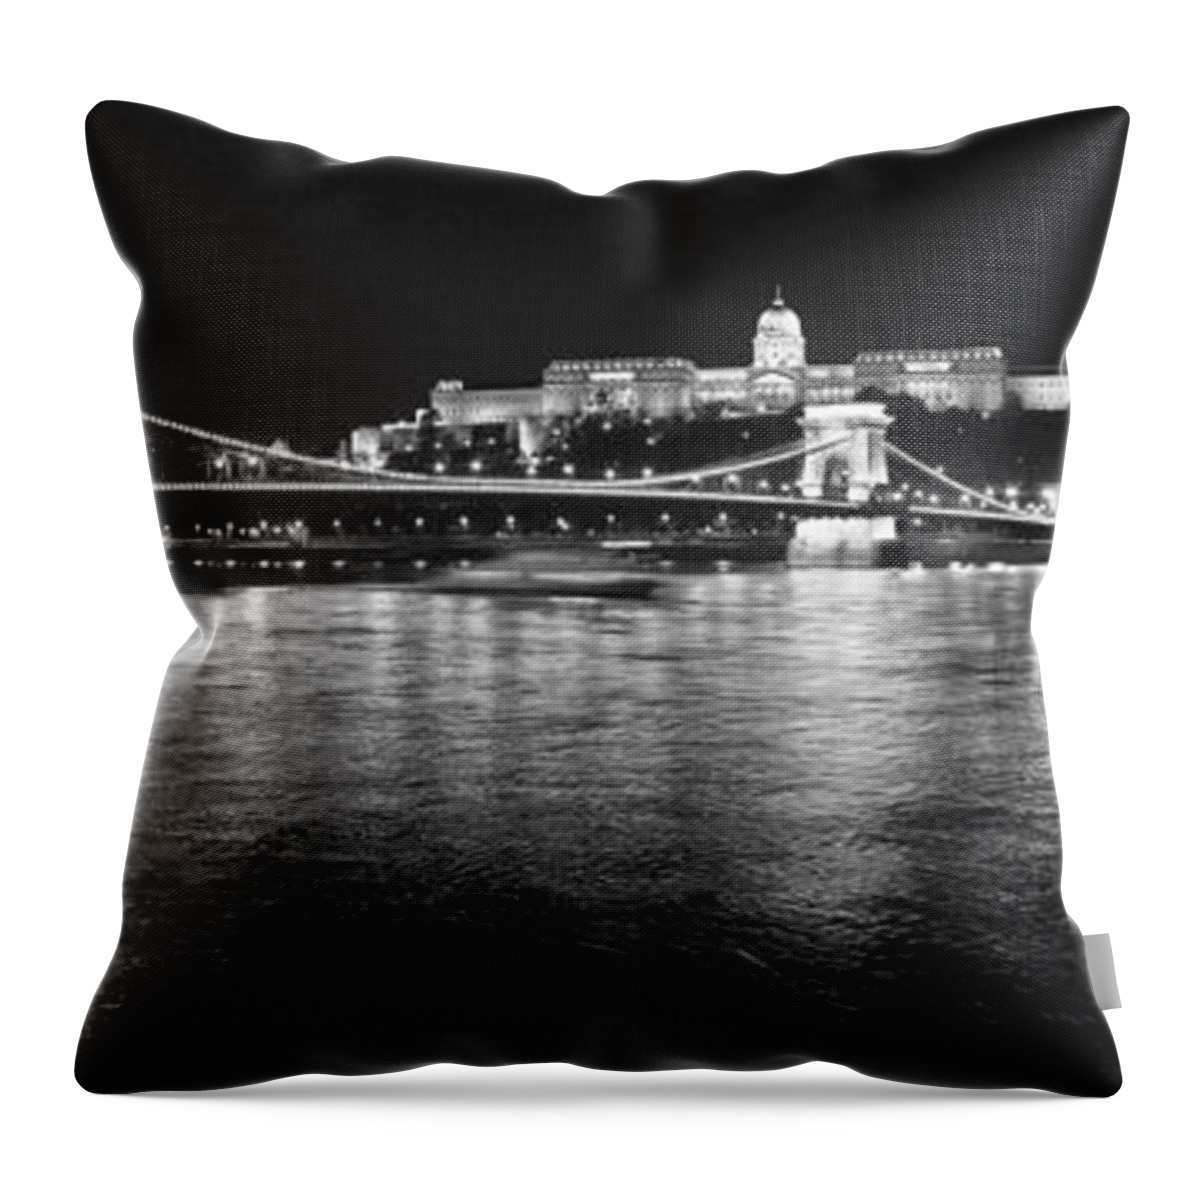 Europe Throw Pillow featuring the photograph Chain Bridge-Budapest by John Magyar Photography